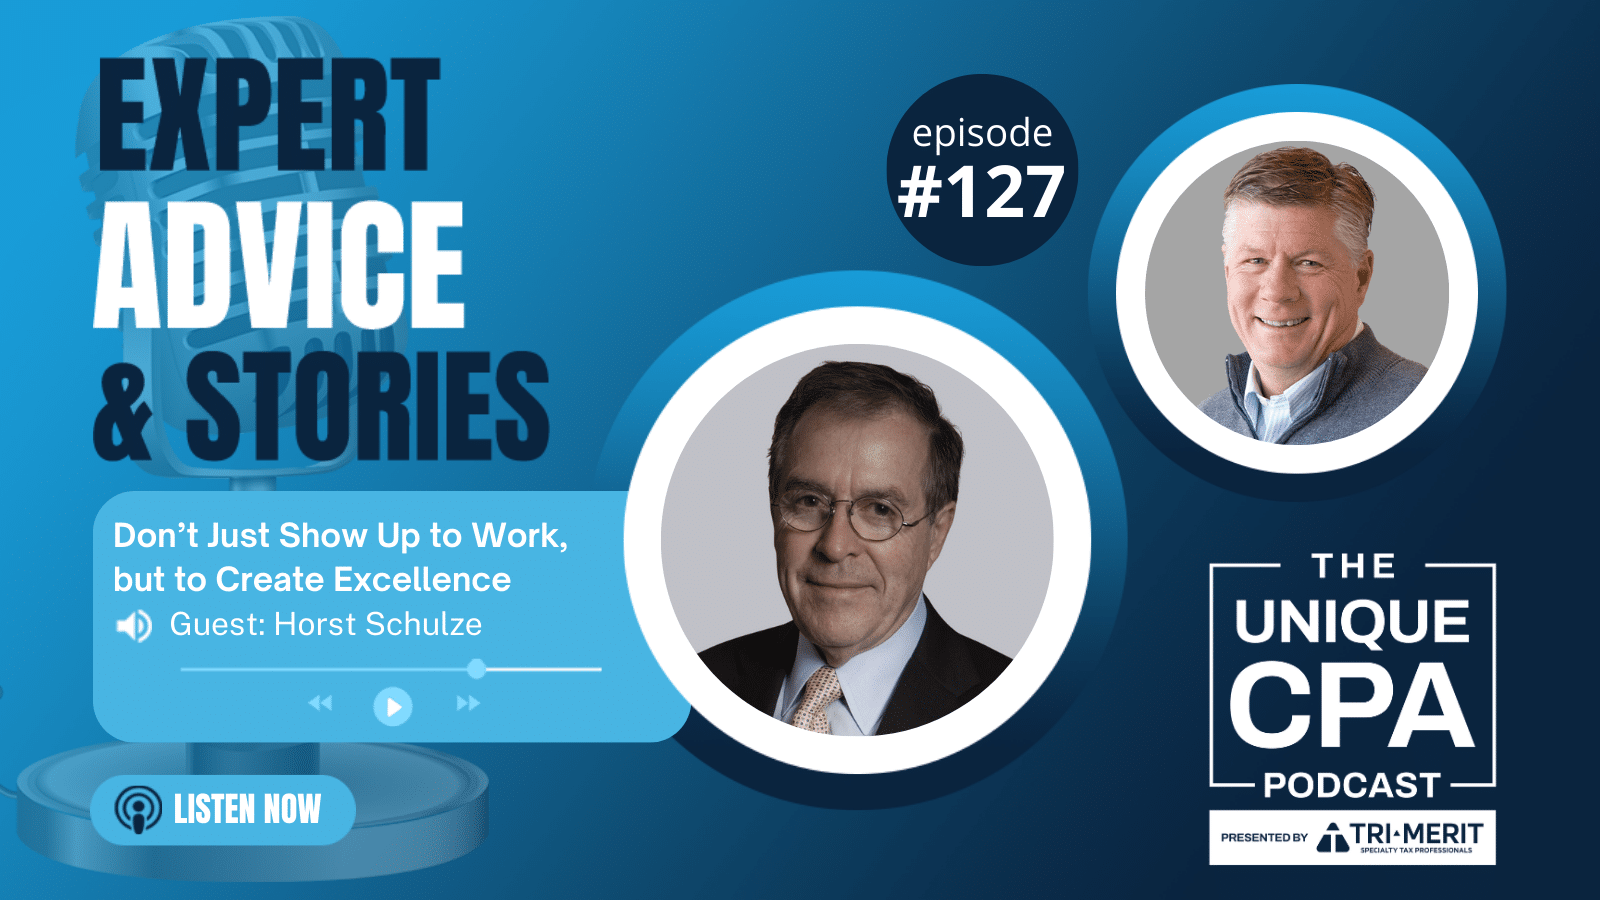 Unique Cpa Featured Image Ep 127 Horst Schulze - Don'T Just Show Up To Work, But To Create Excellence - Tri-Merit